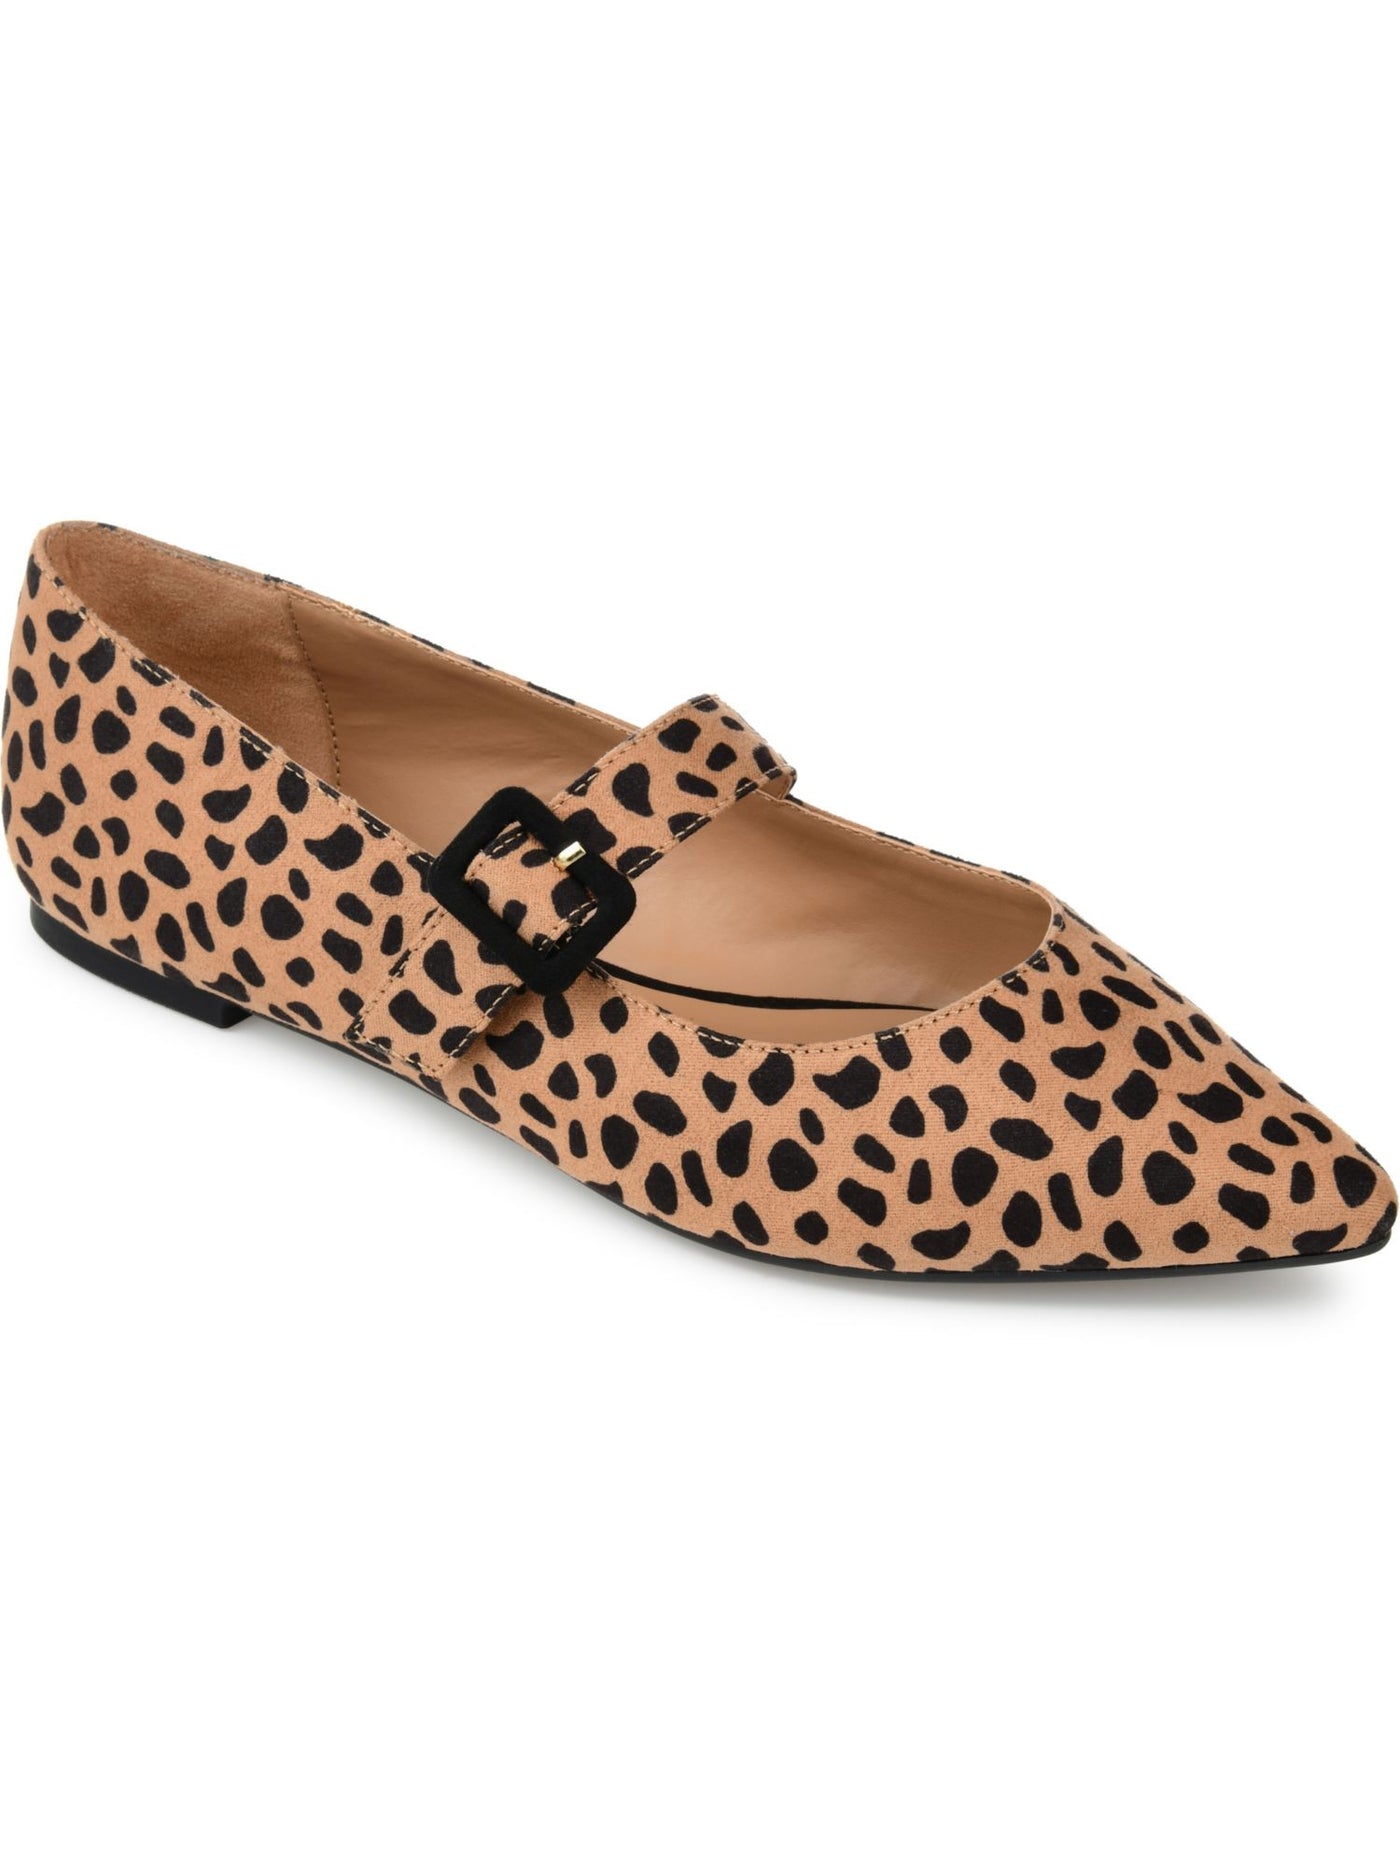 JOURNEE COLLECTION Womens Beige Animal Print Padded Karissa Pointed Toe Buckle Flats Shoes 9.5